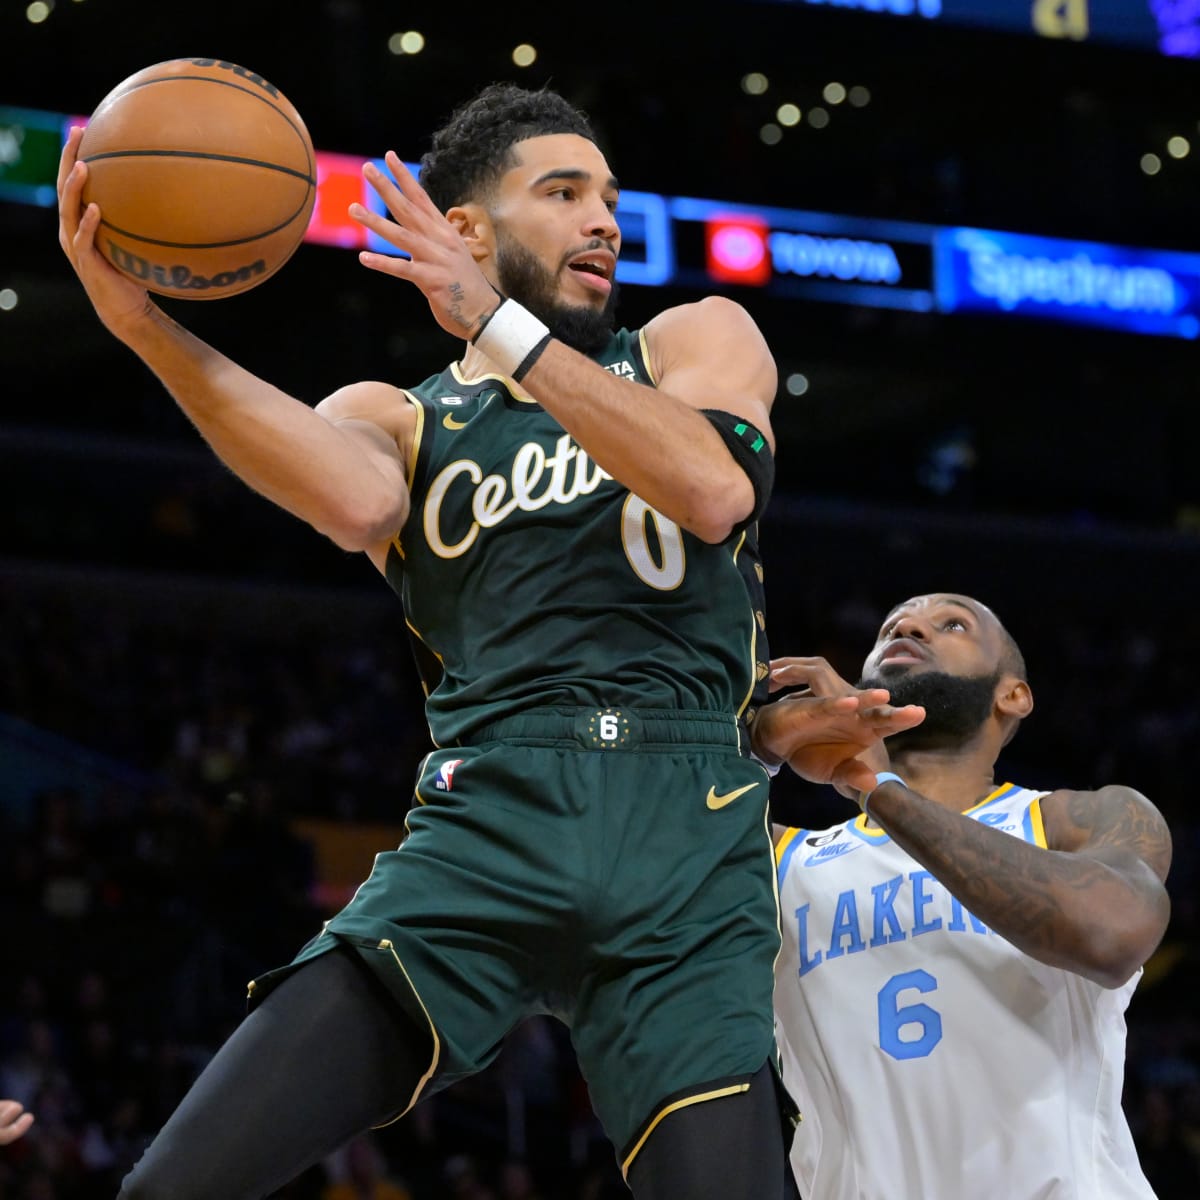 Celtics reportedly set to visit Lakers on Christmas Day - CBS Boston